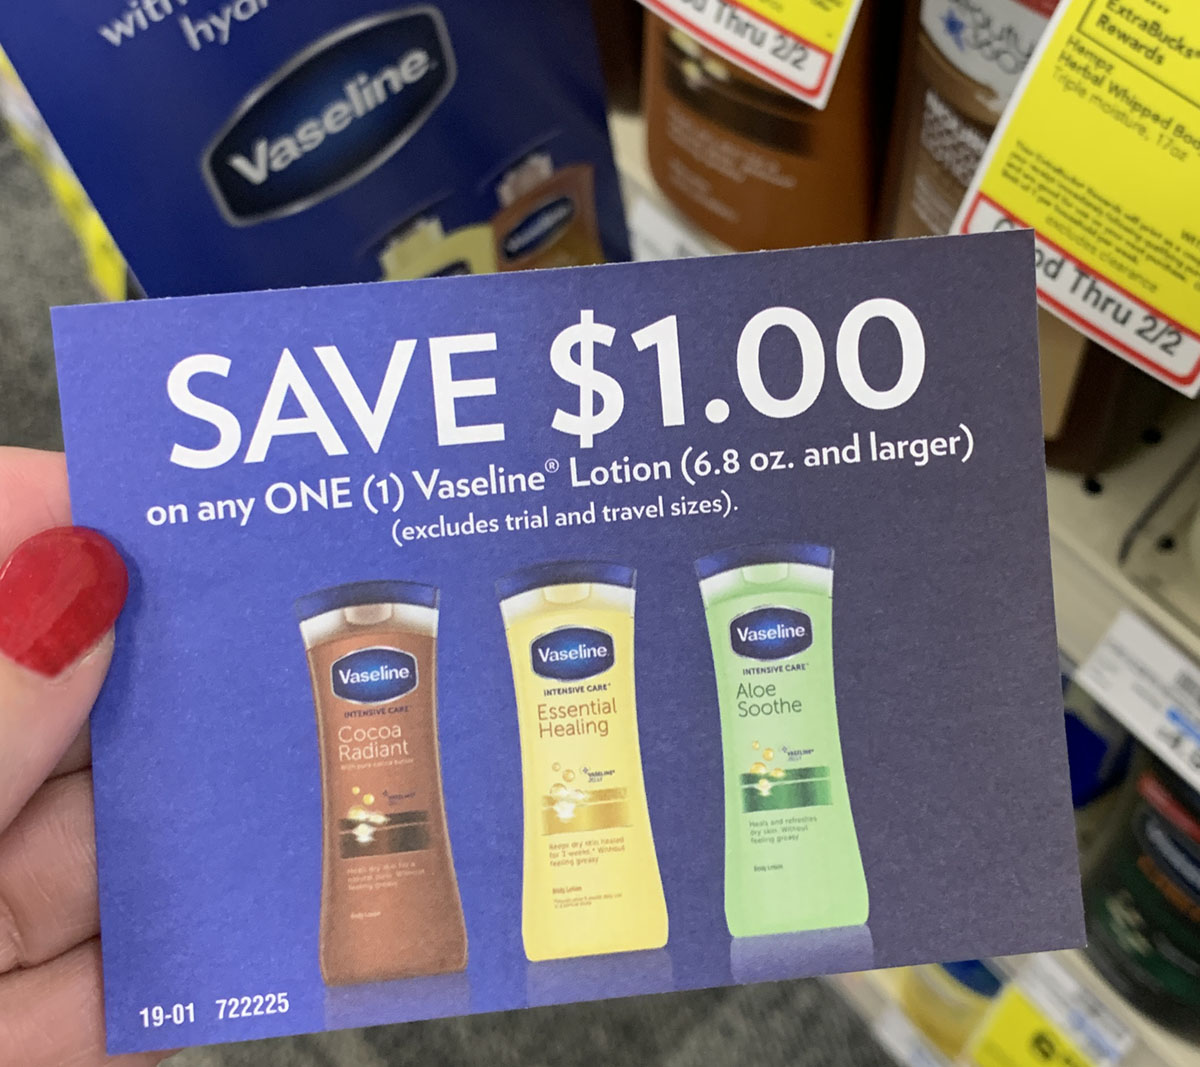 $1 off coupon for Vaseline Lotion